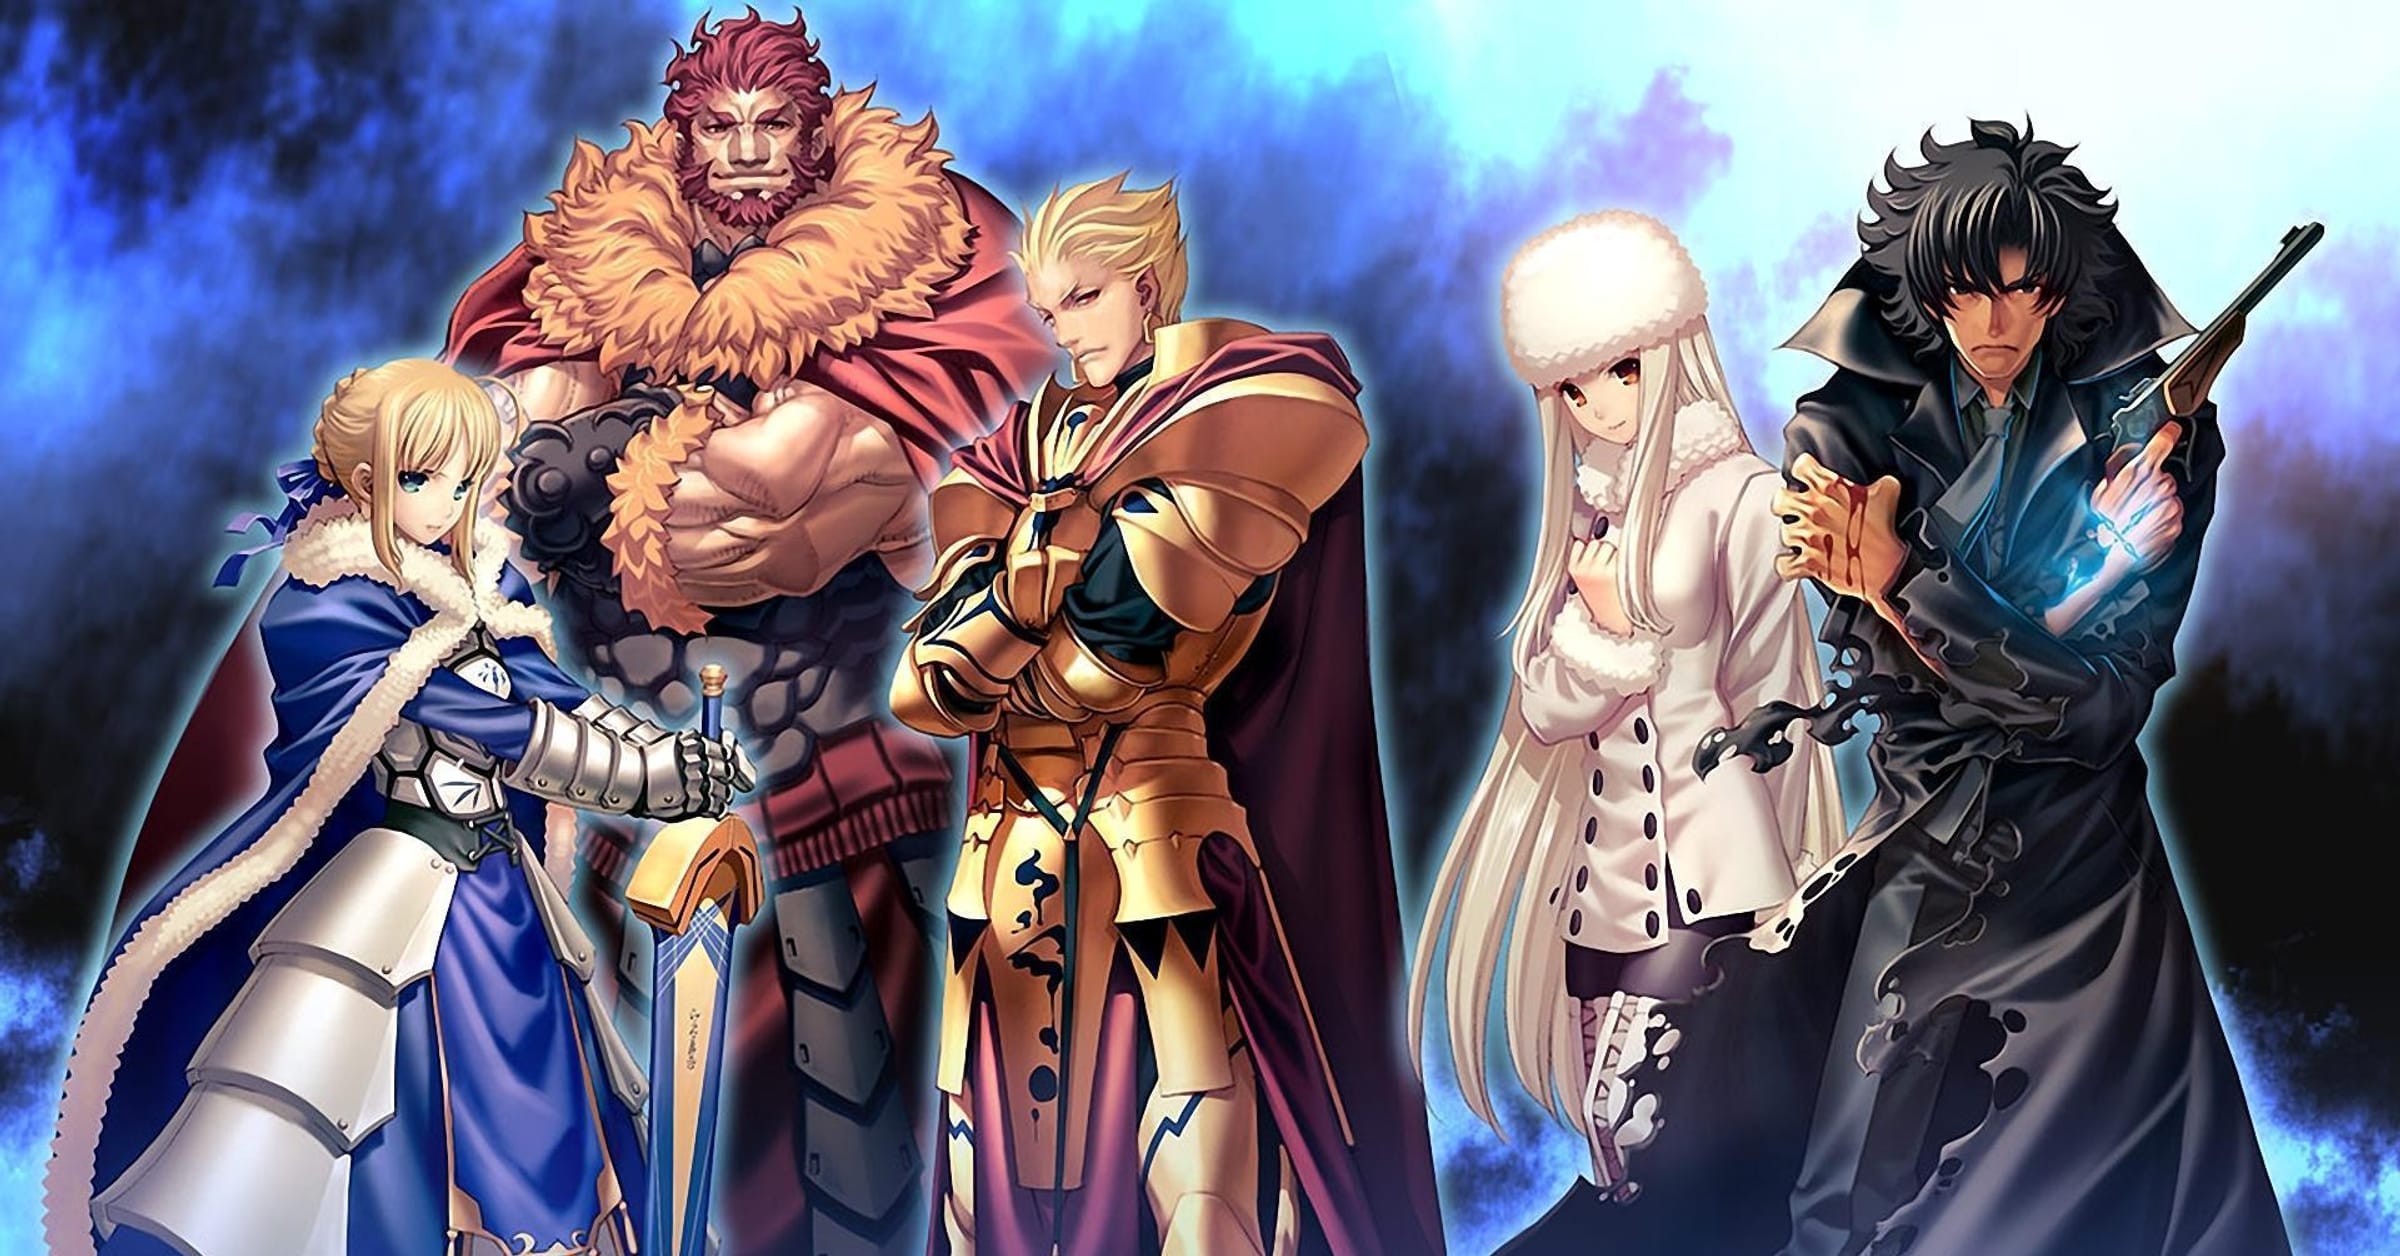 10 Strongest Characters In Fate/Stay Night's 5th Holy Grail War, Ranked